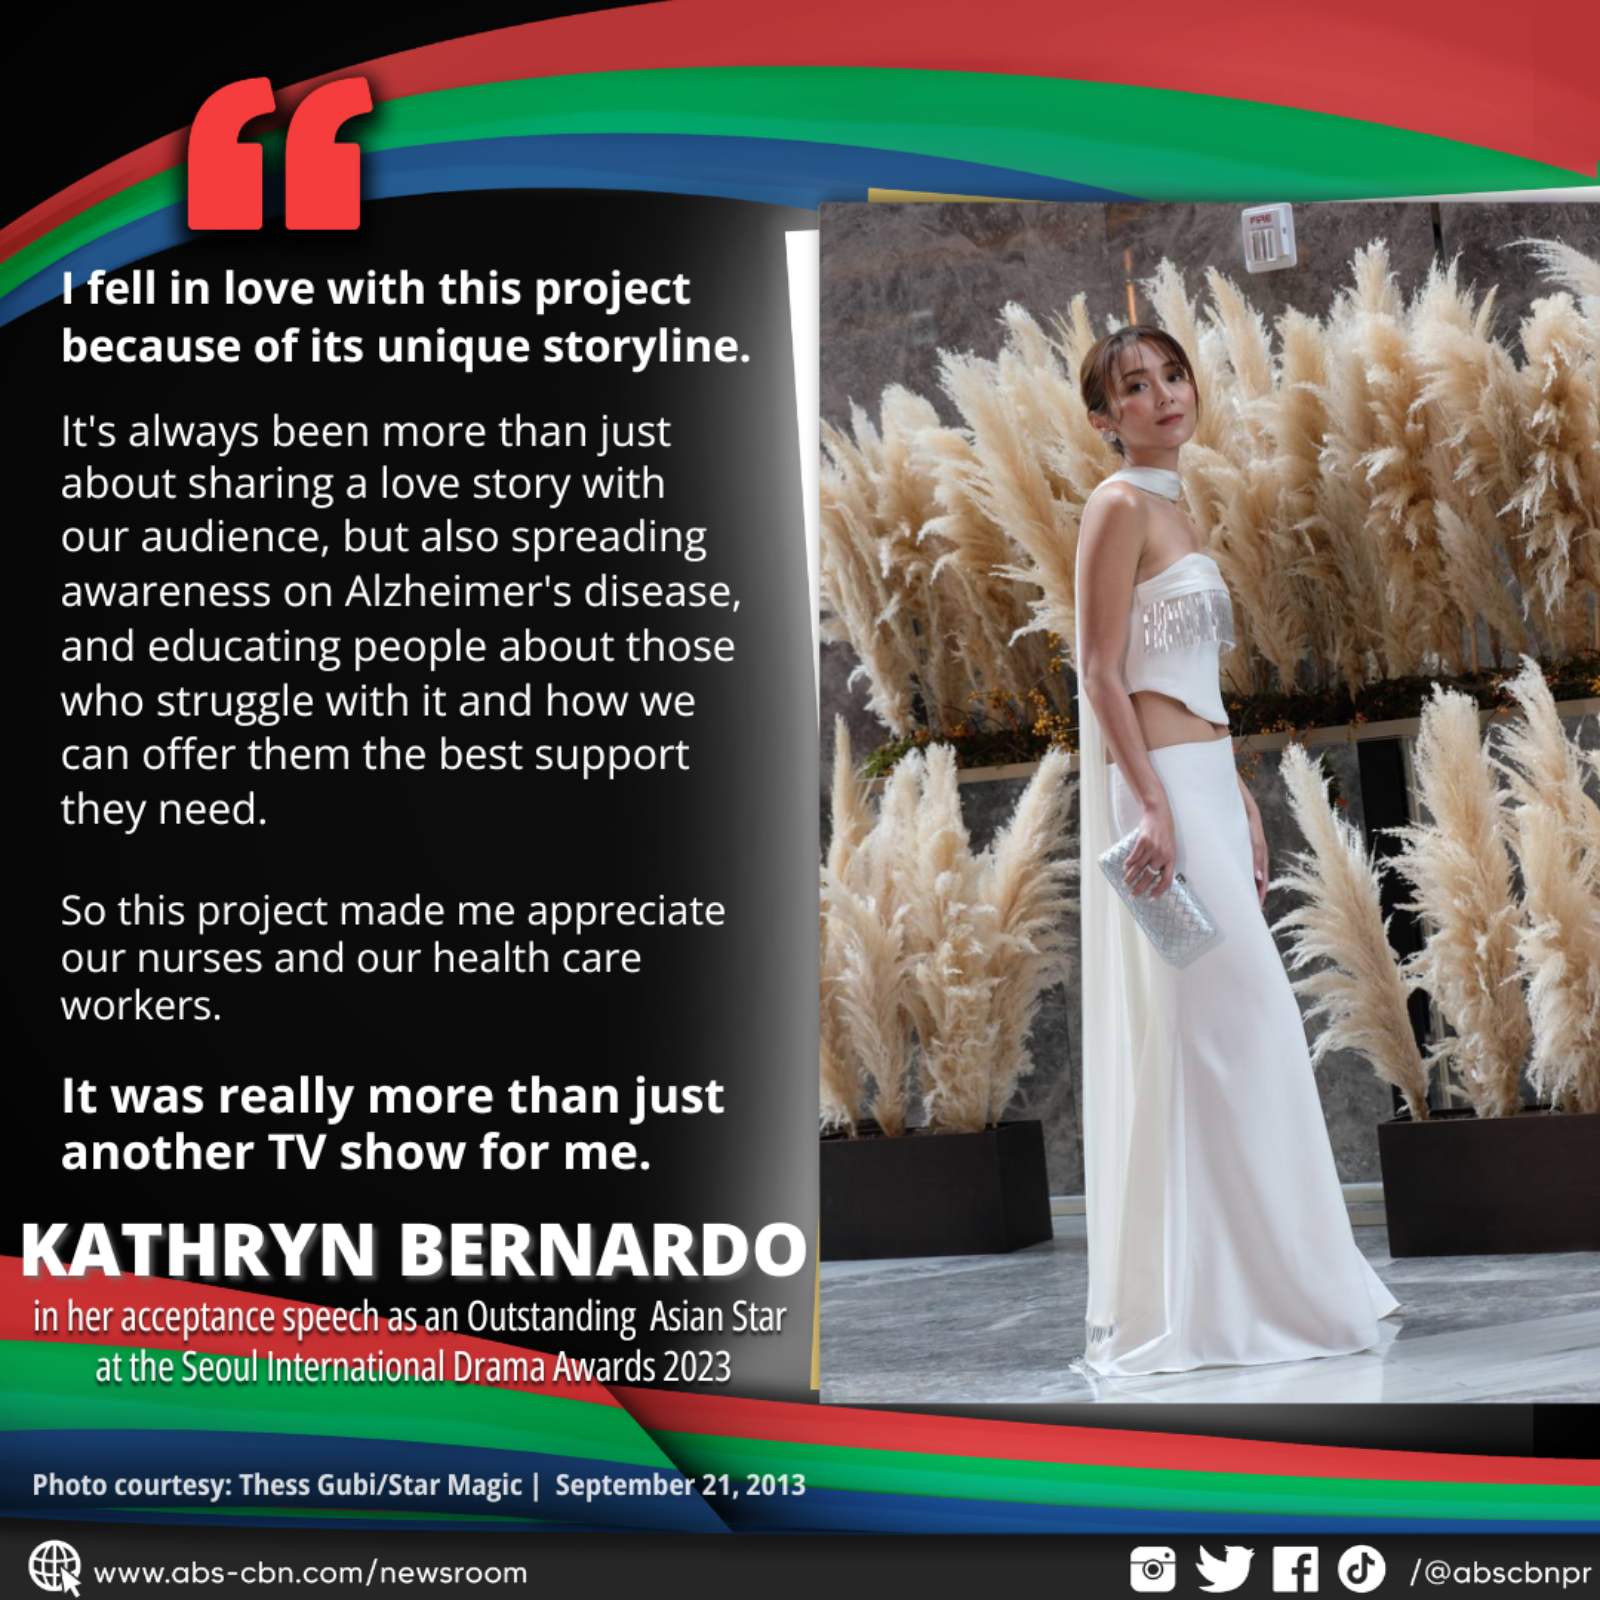 KATHRYN QUOTE 1